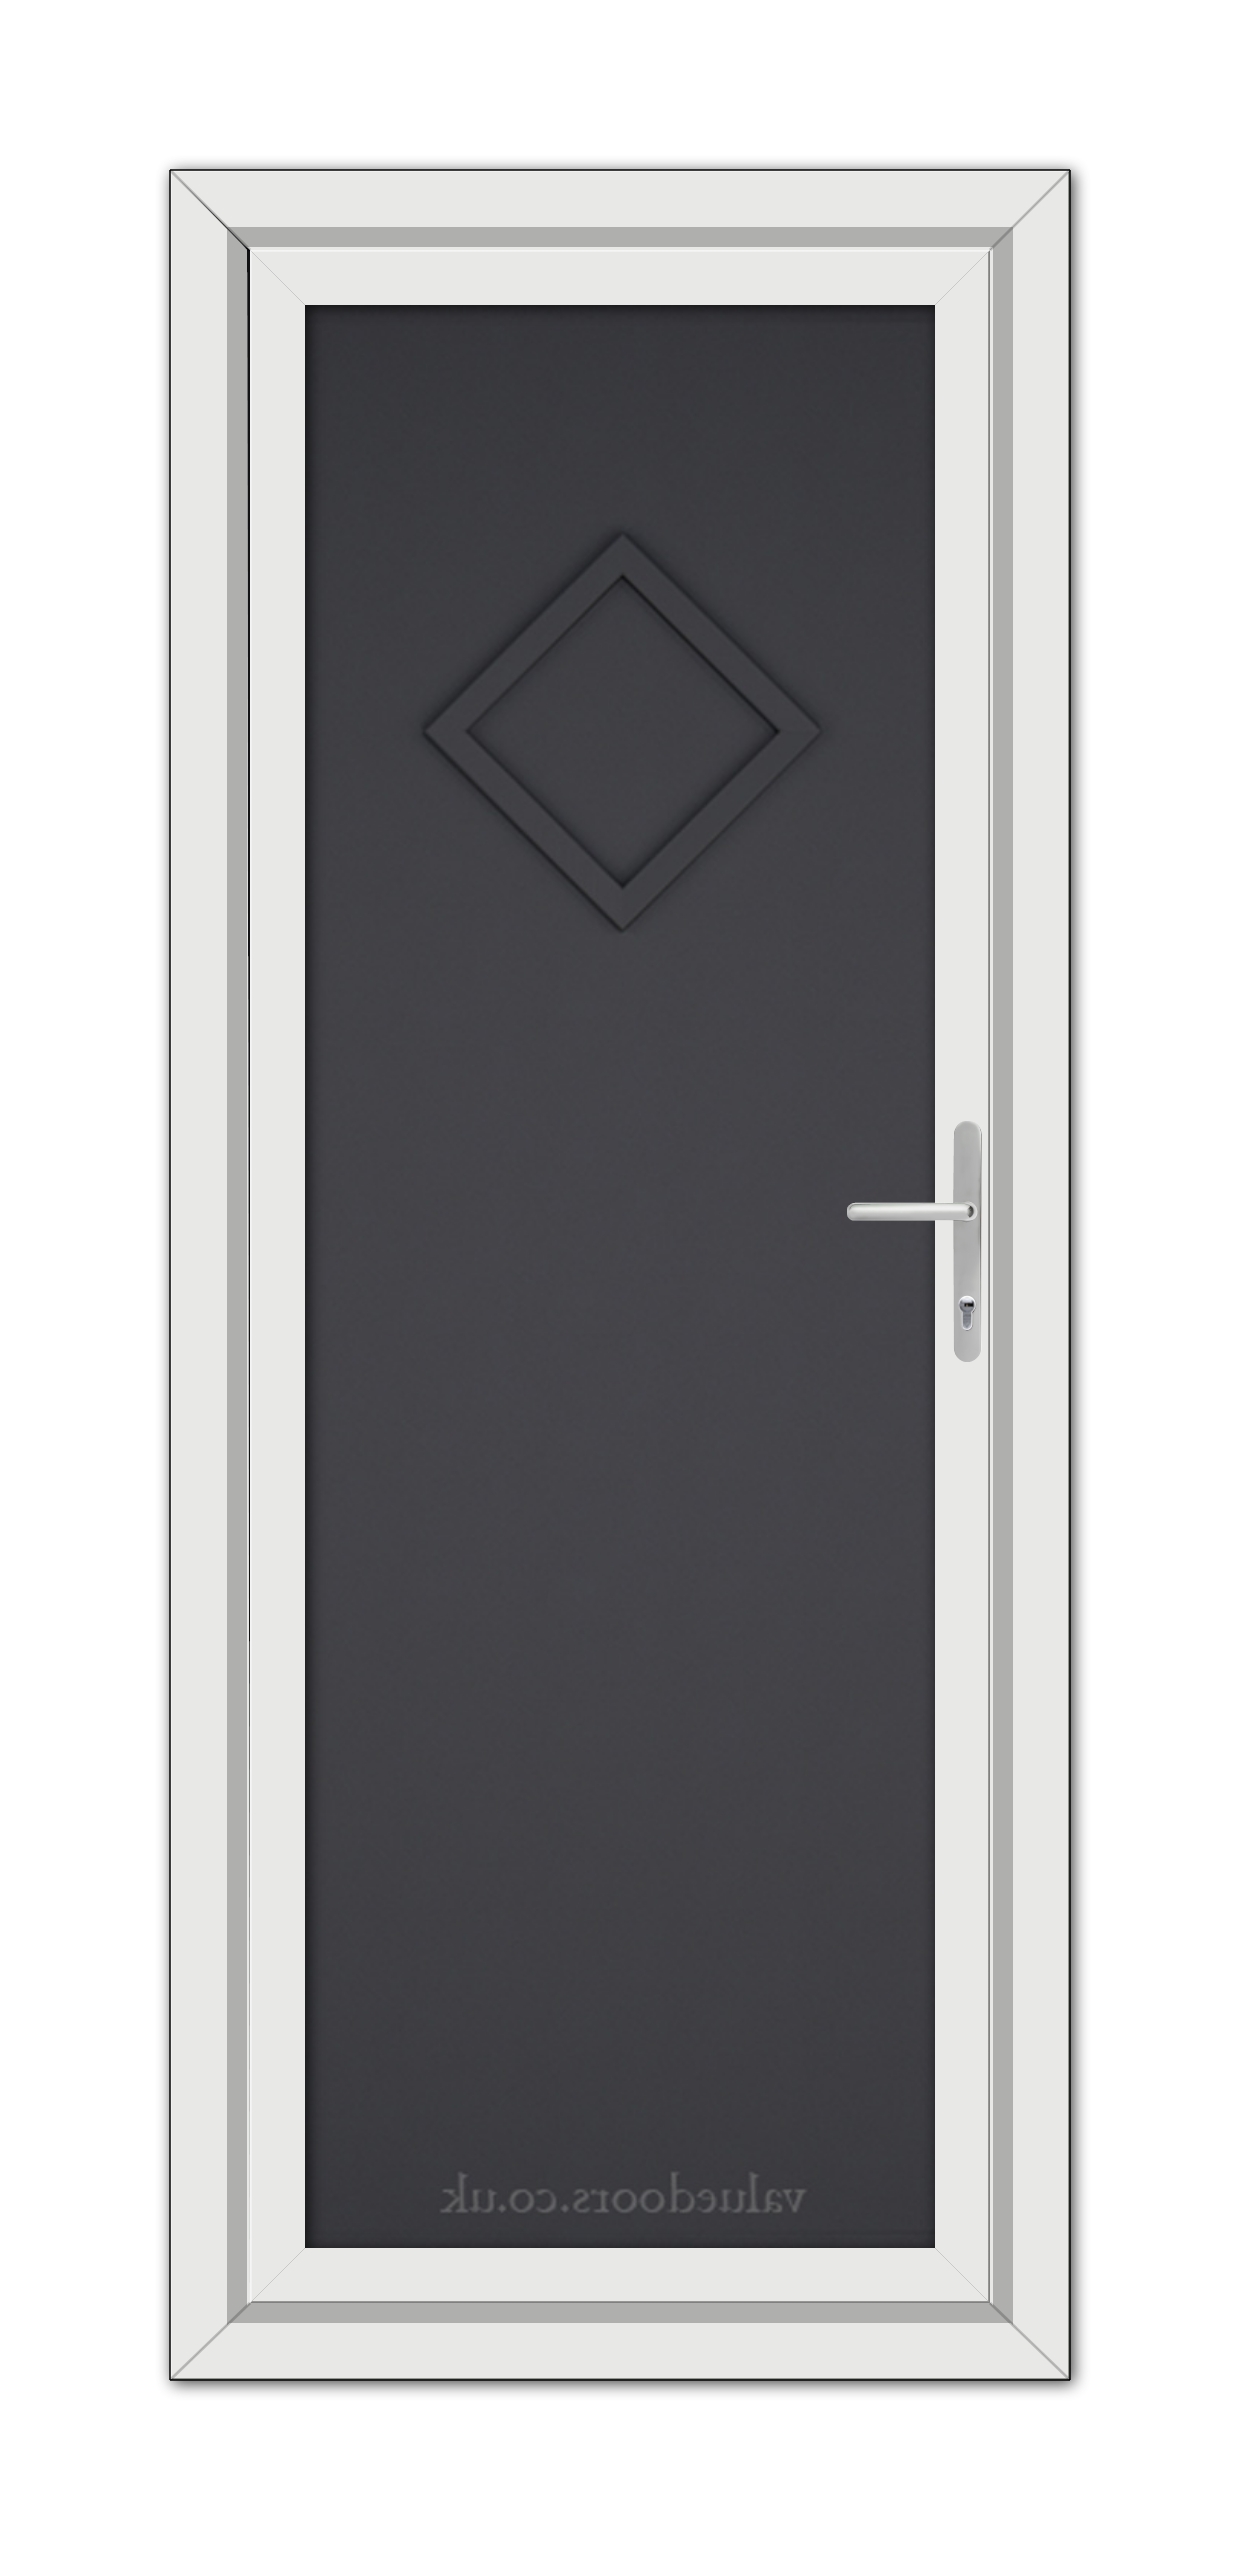 A Grey Modern 5131 Solid uPVC door with a diamond-shaped panel and a silver handle, set within a white frame.